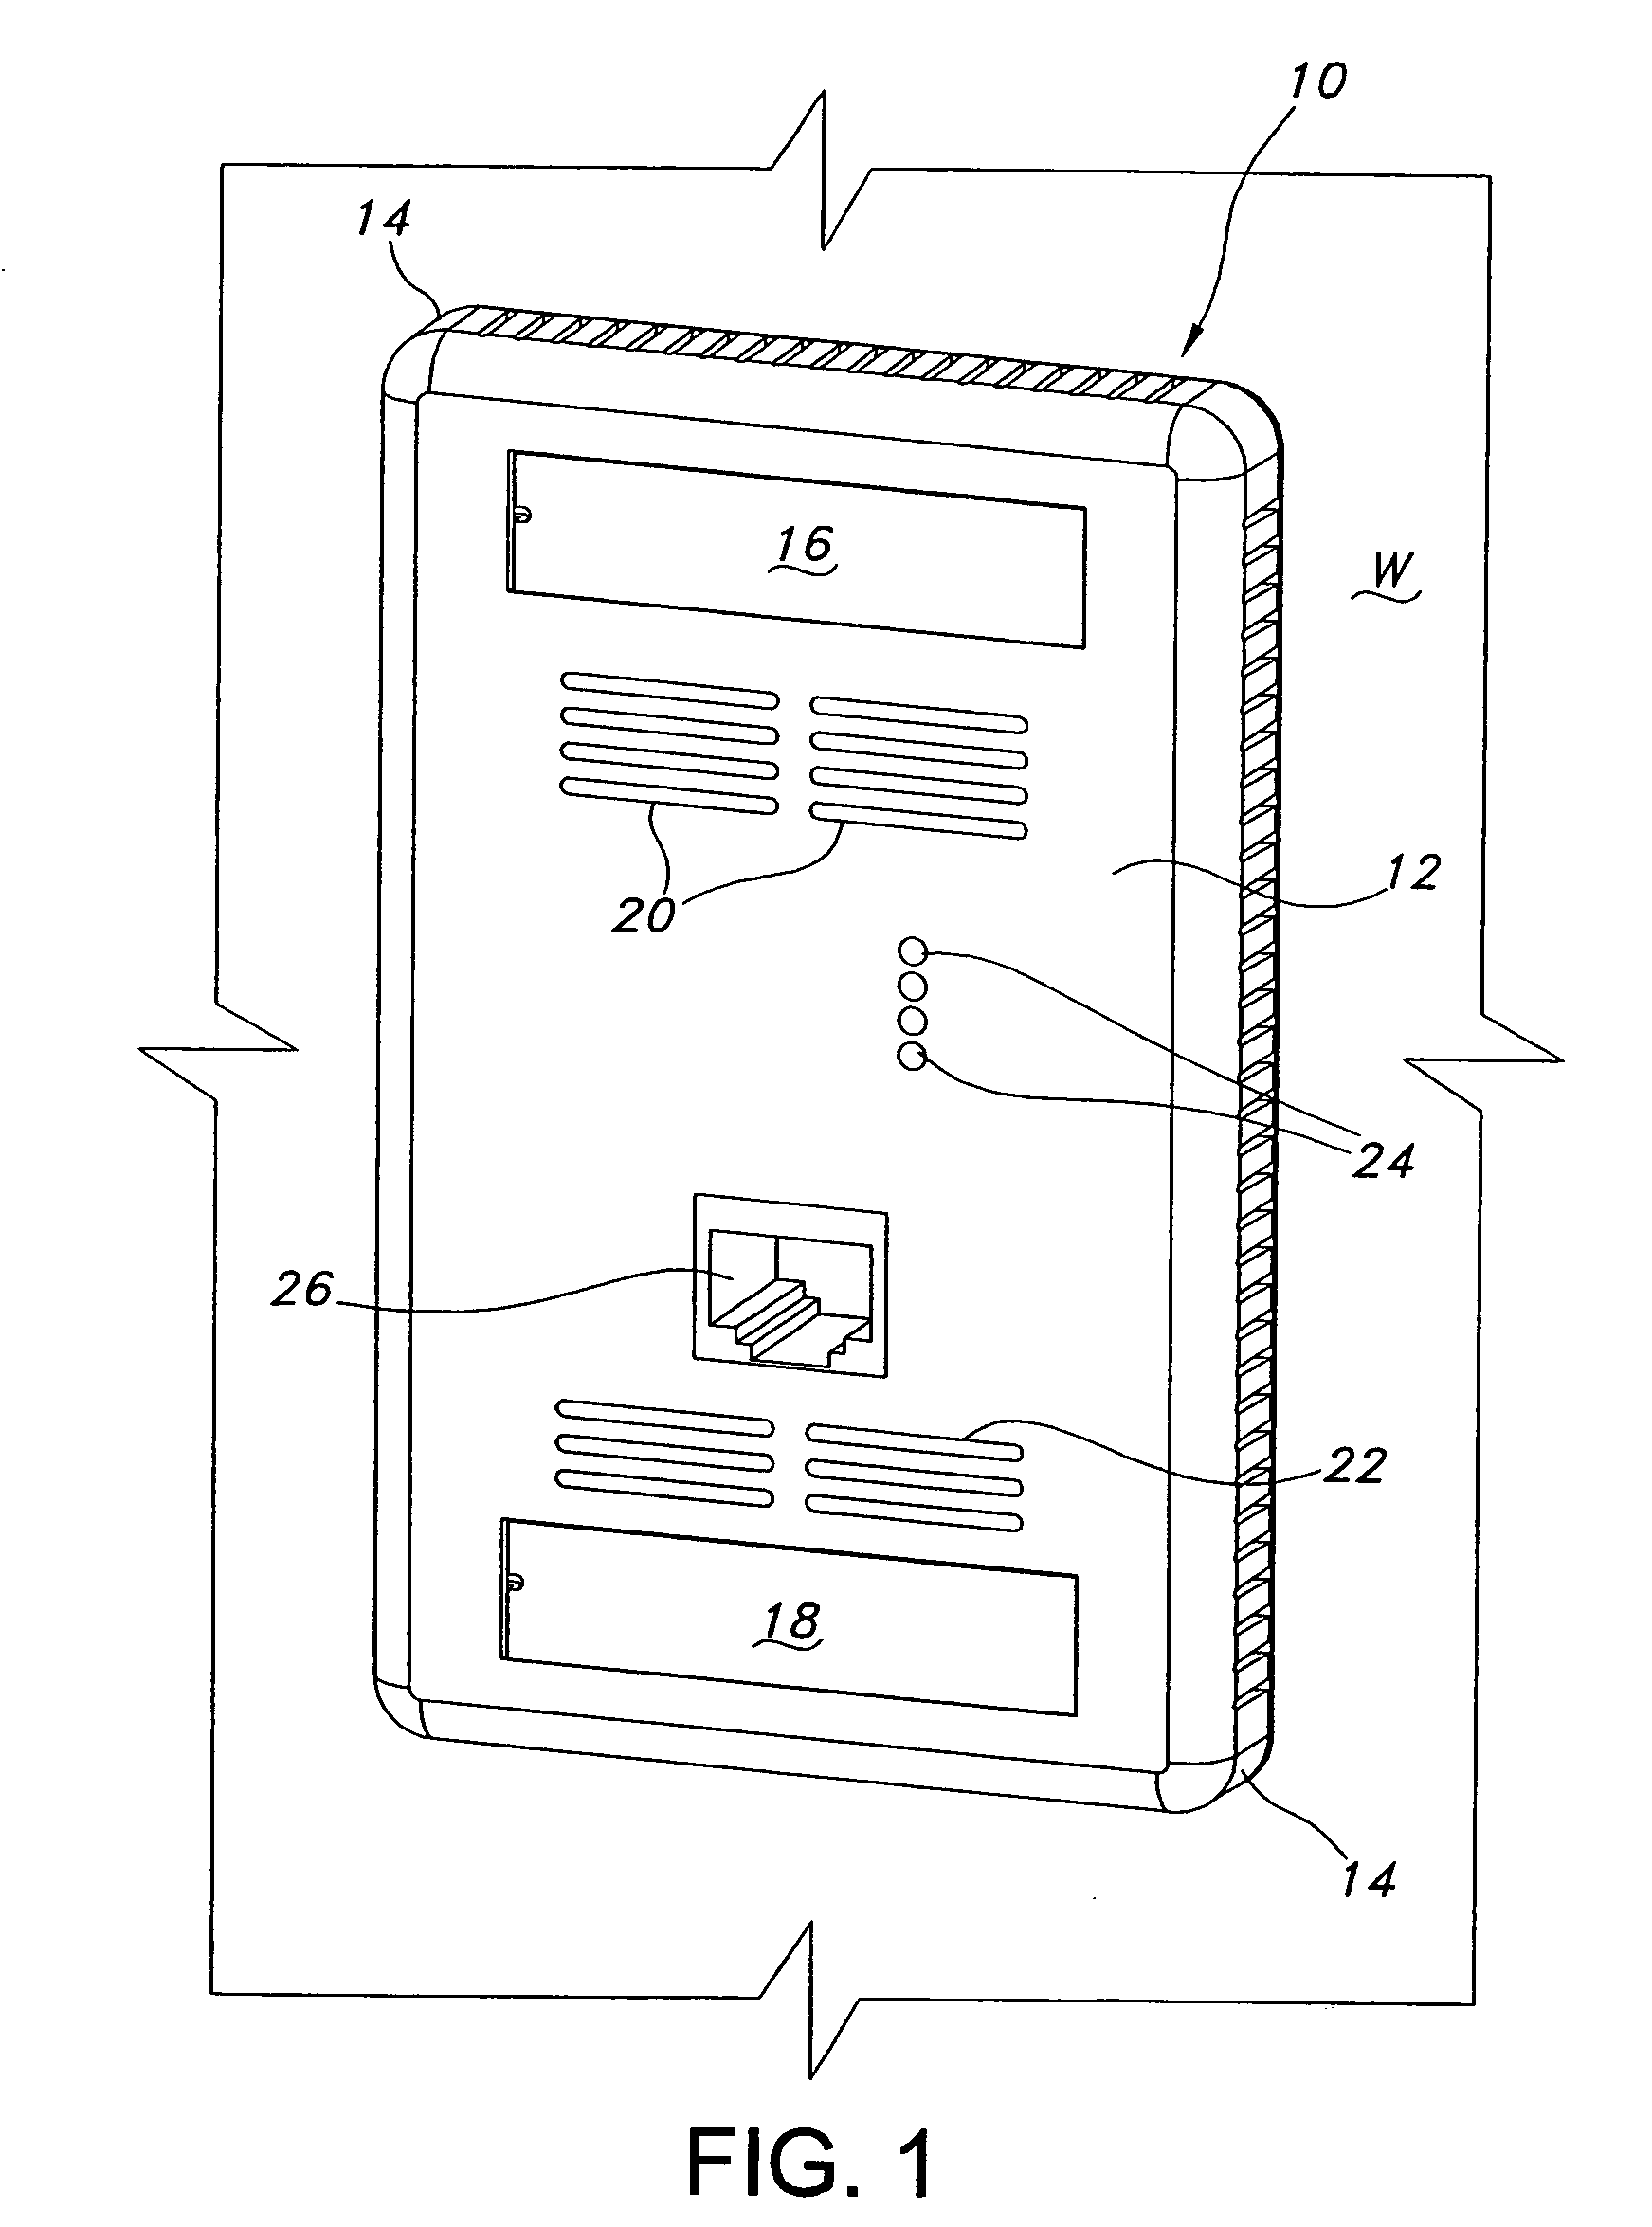 Wireless access point with temperature control system